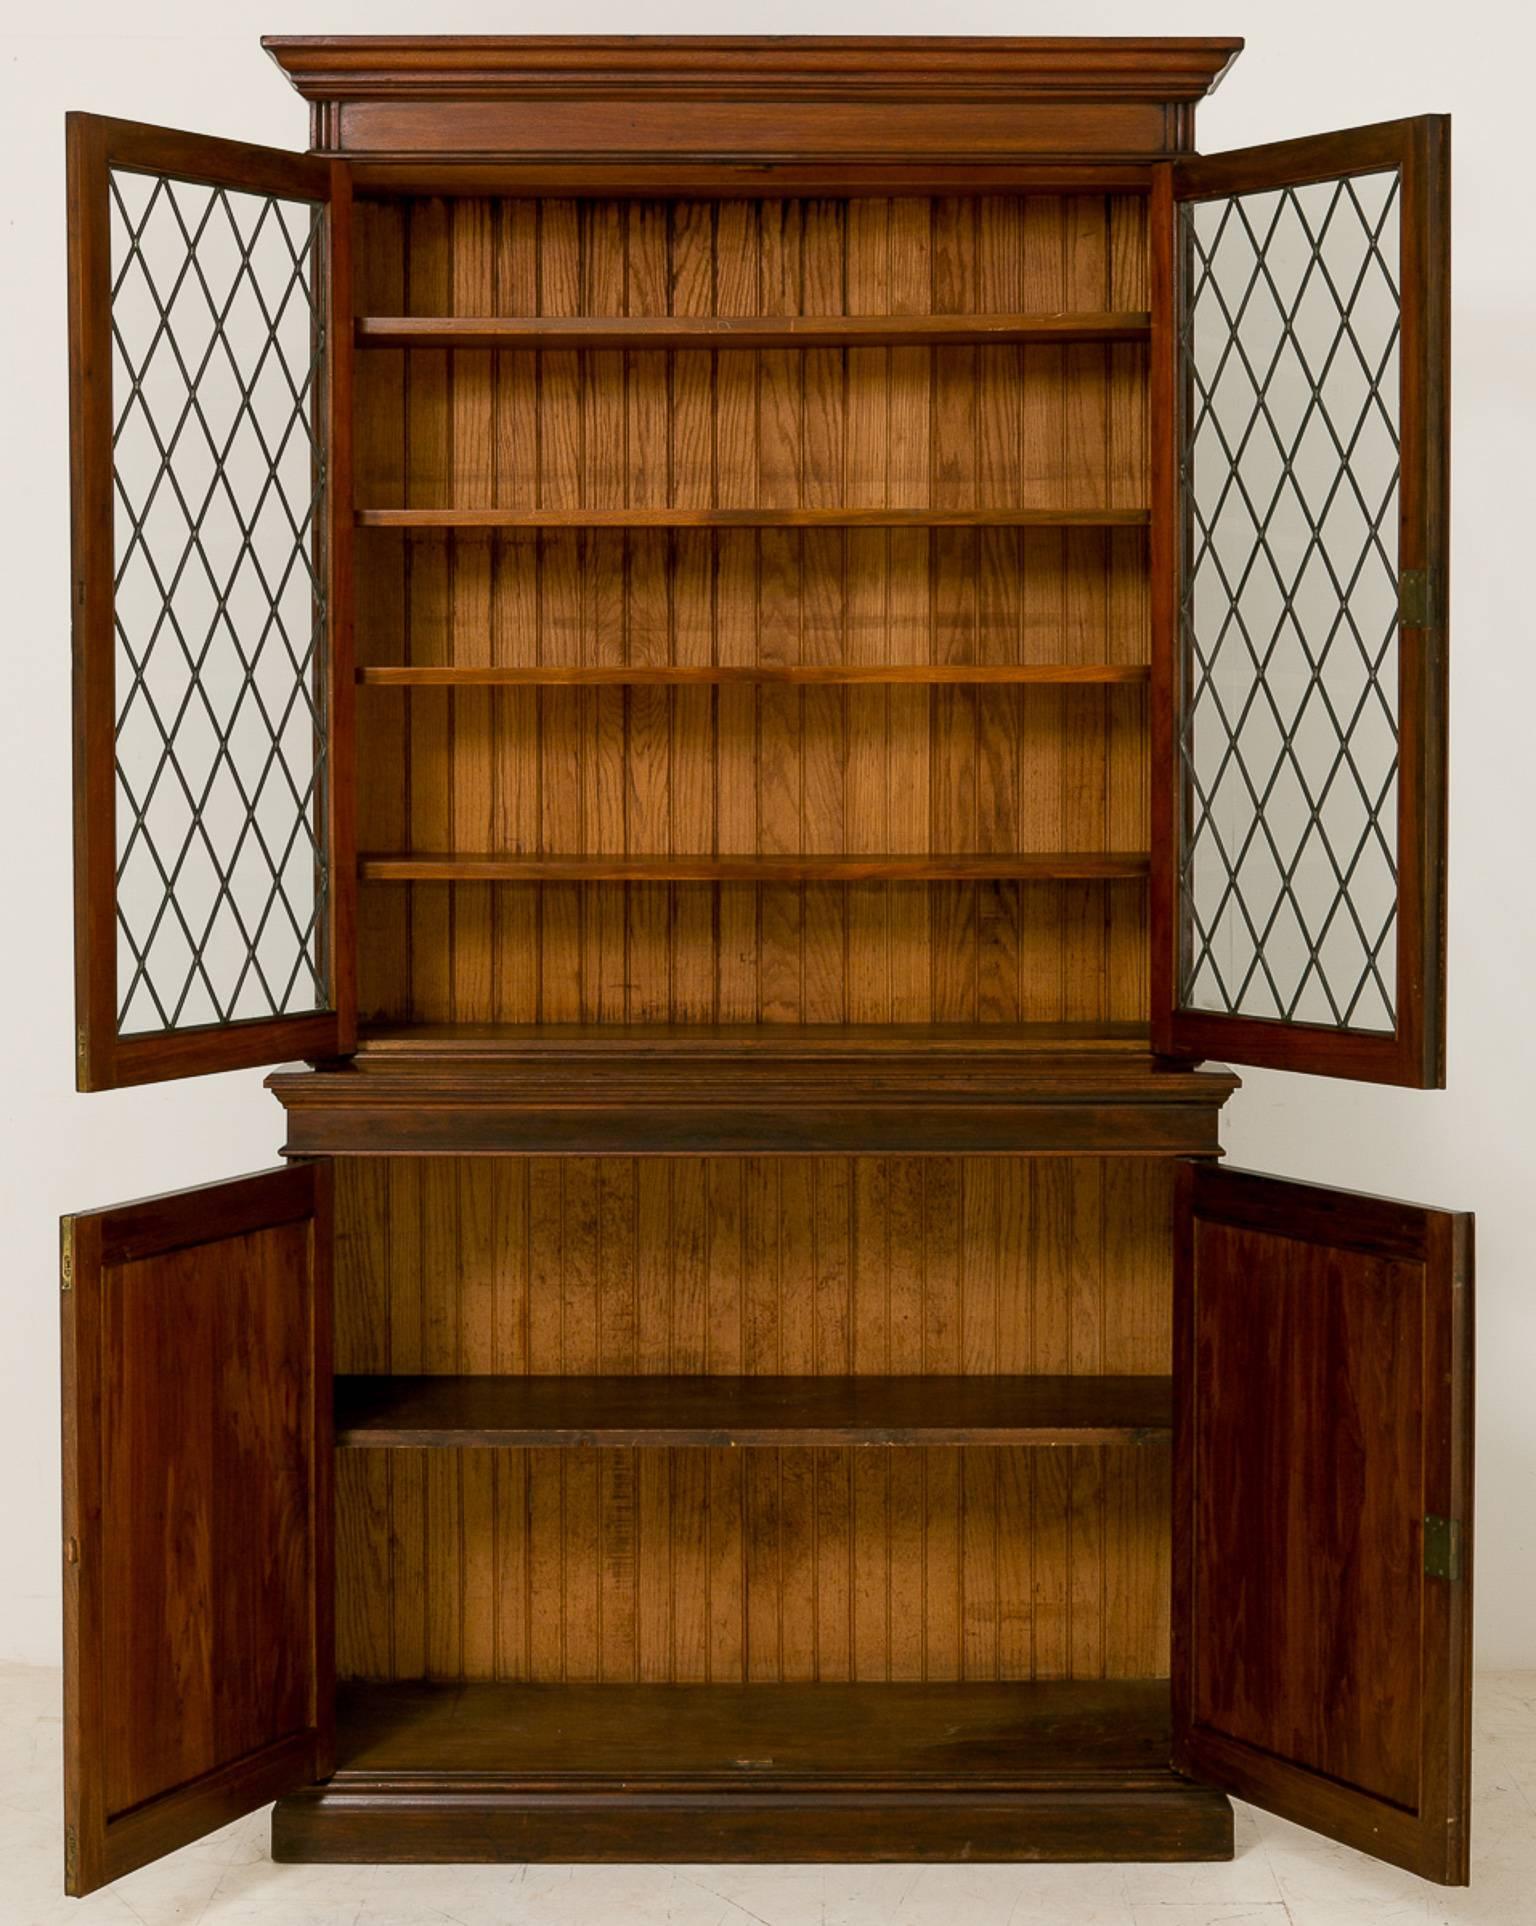 Late Victorian Walnut two door bookcase, standing on a plinth base, two fielded panelled doors.
the top section having four adjustable shelves and leaded glass doors.

Size:
Height 90